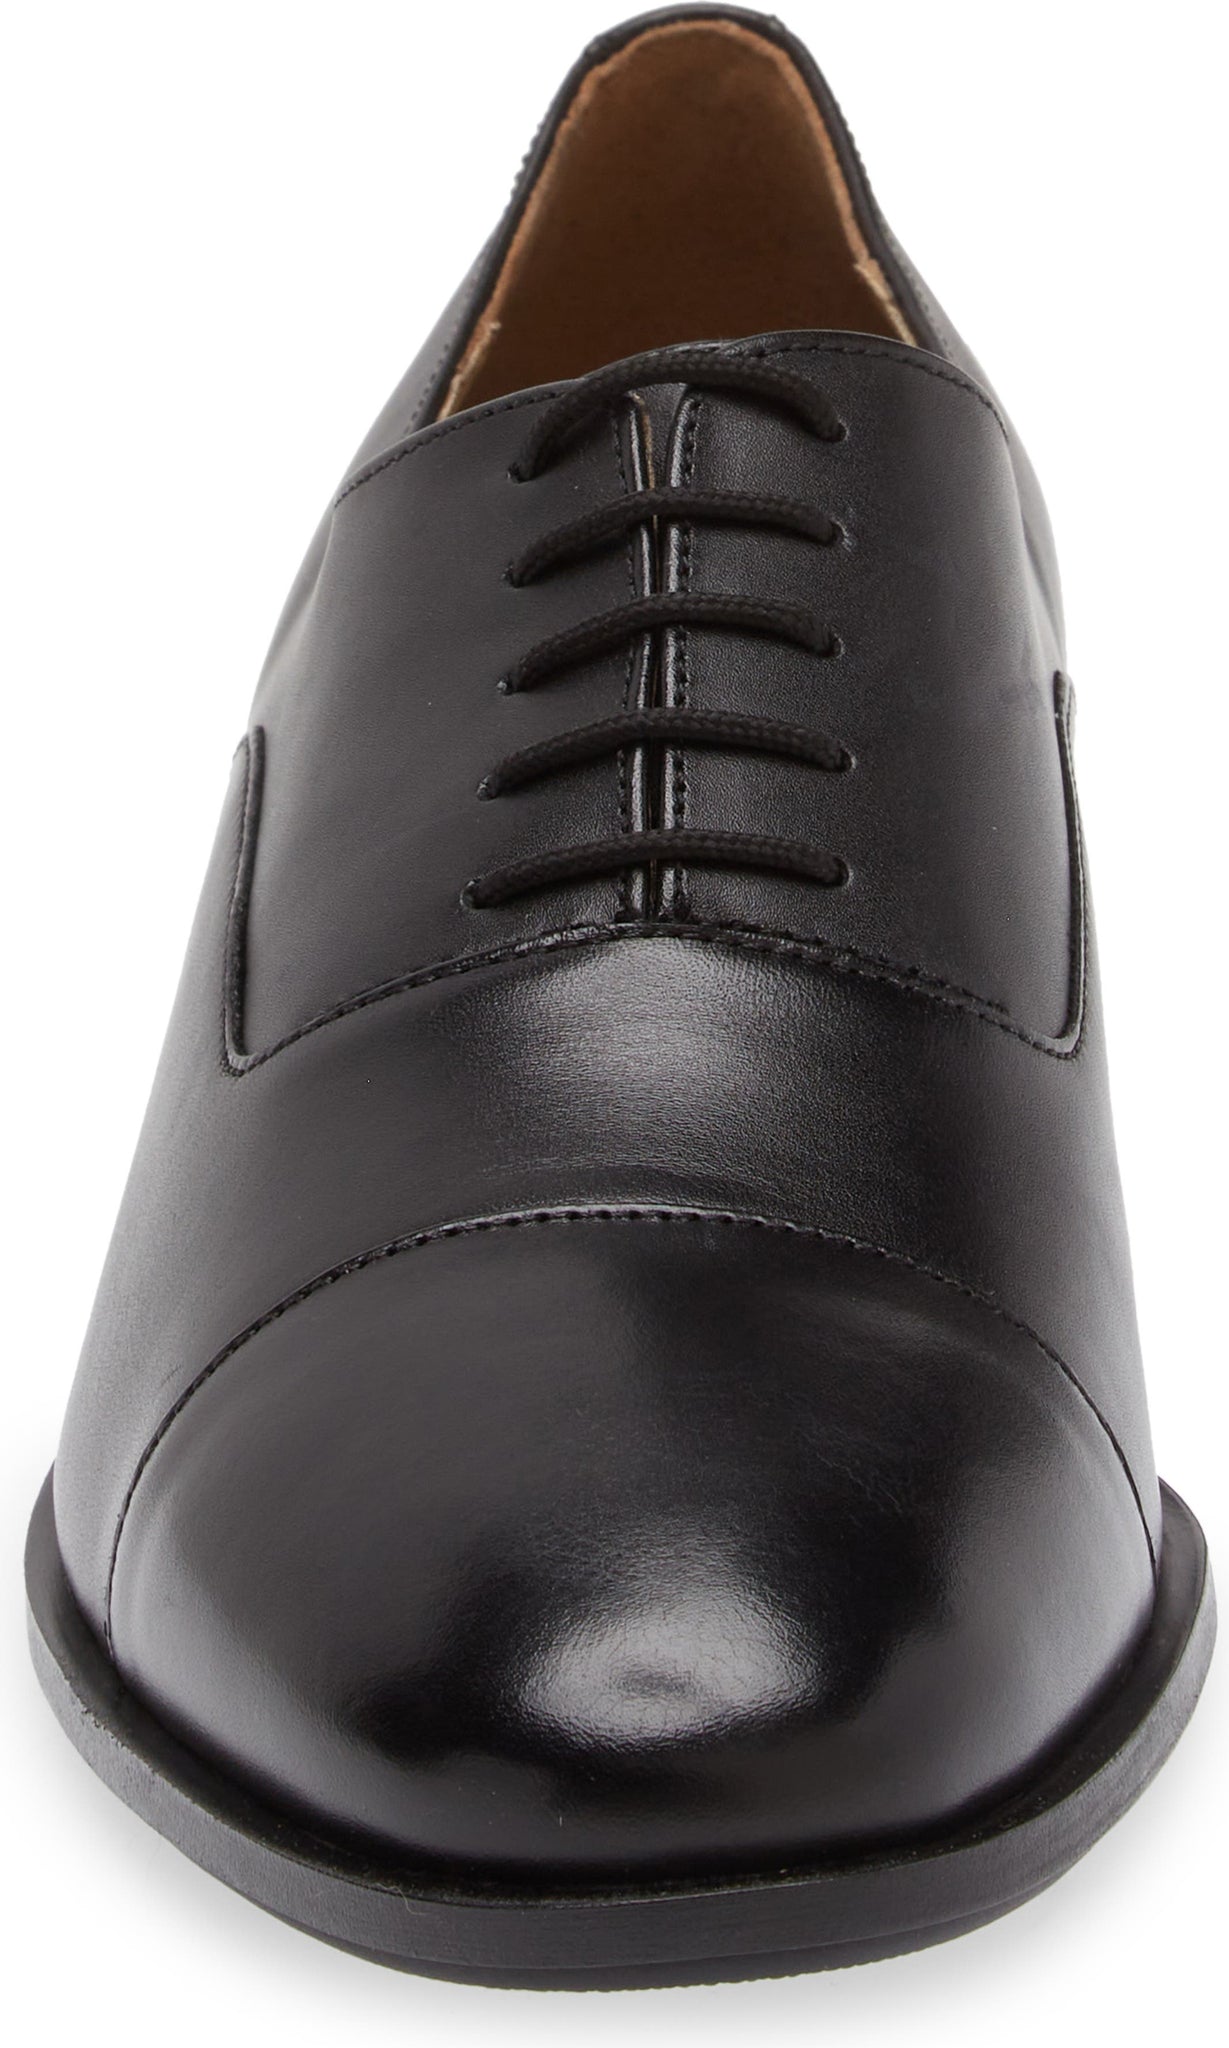 BOSS Colby Leather Derby, Alternate, color, Black